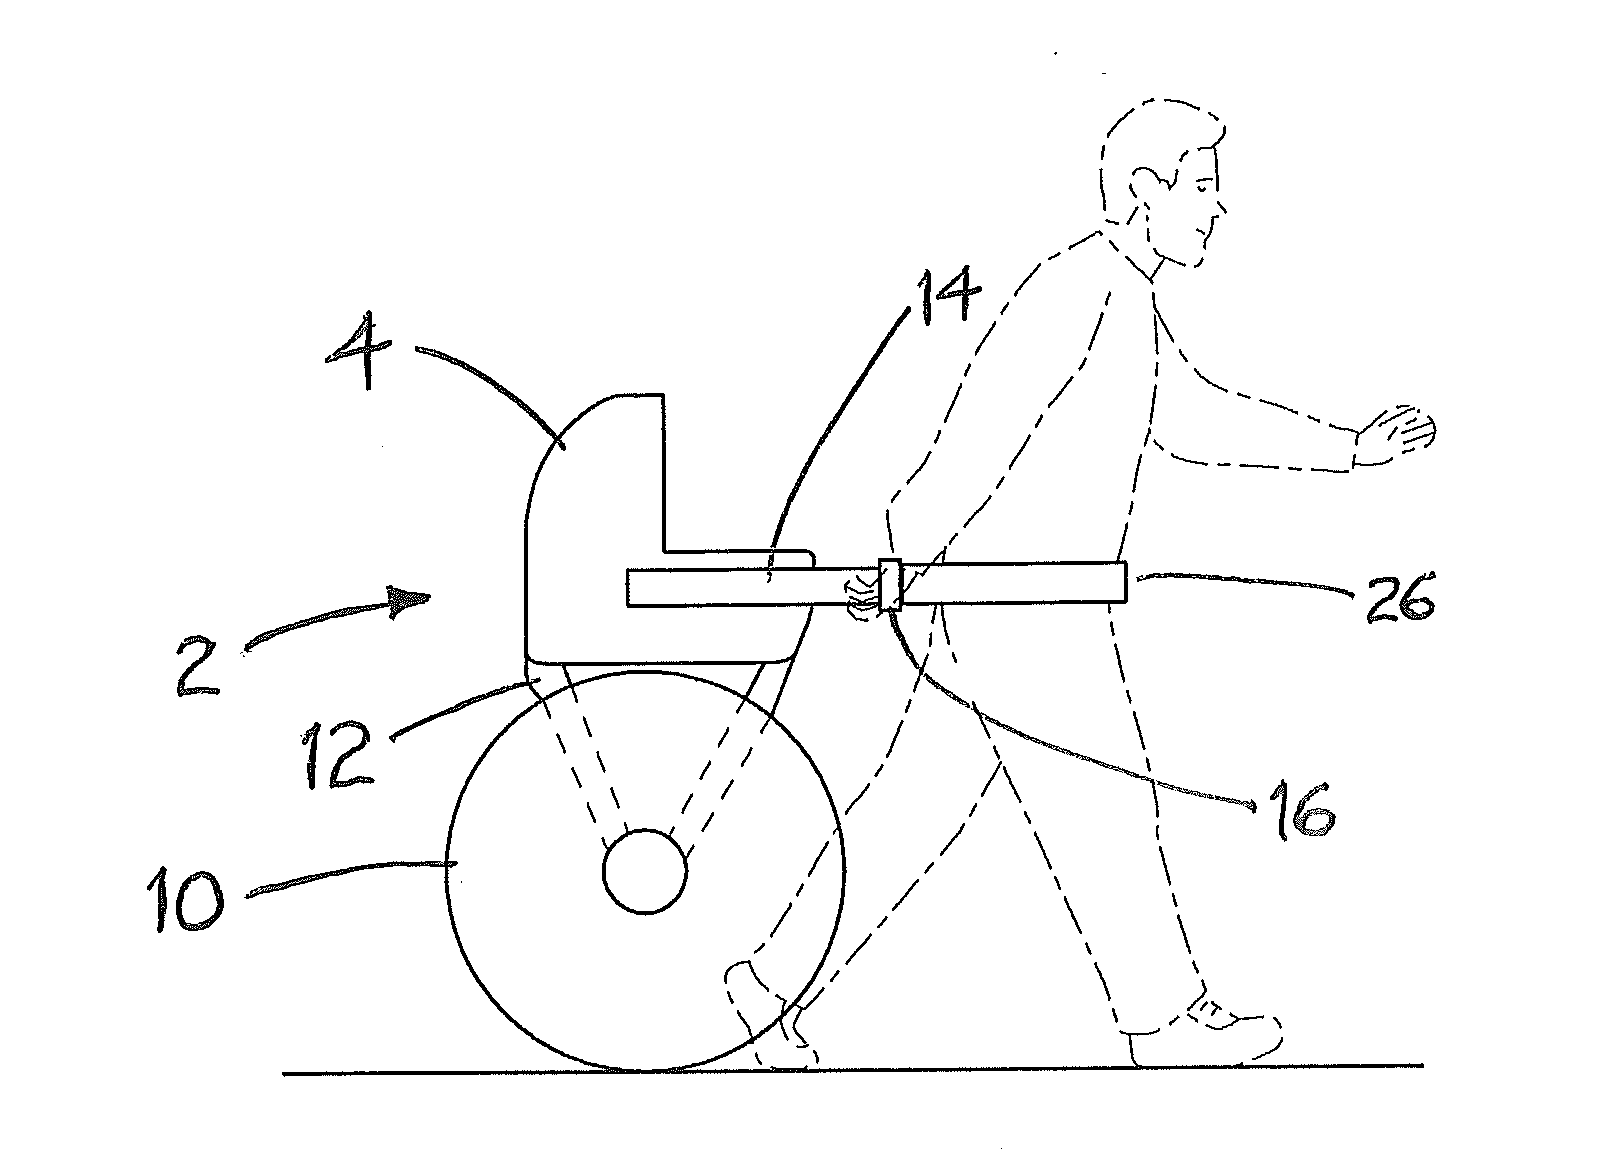 Hands free carriage and harness assembly having multiple modes of towing a load